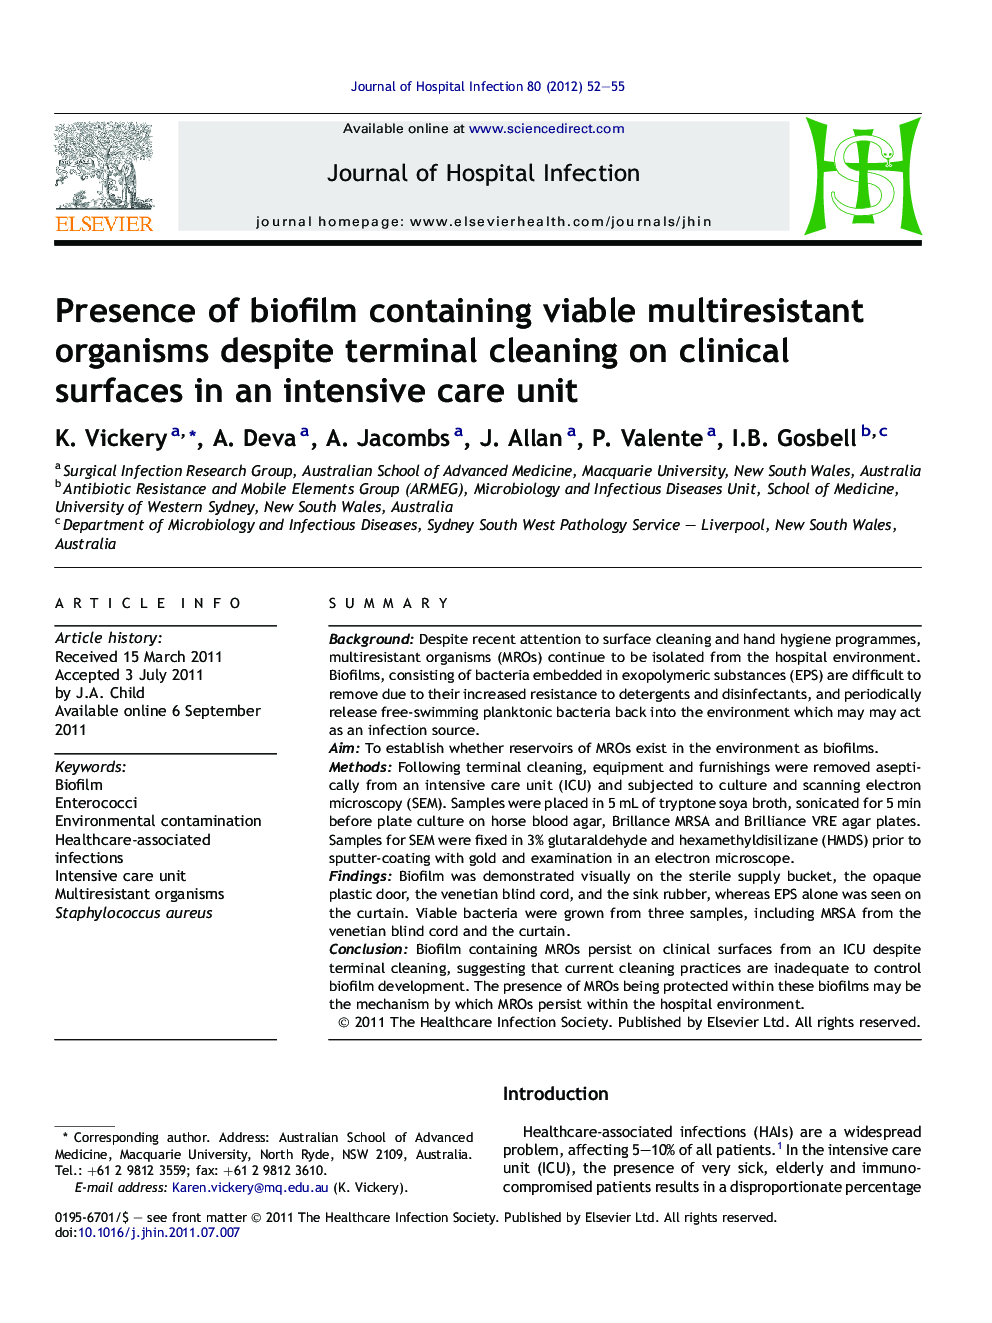 Presence of biofilm containing viable multiresistant organisms despite terminal cleaning on clinical surfaces in an intensive care unit